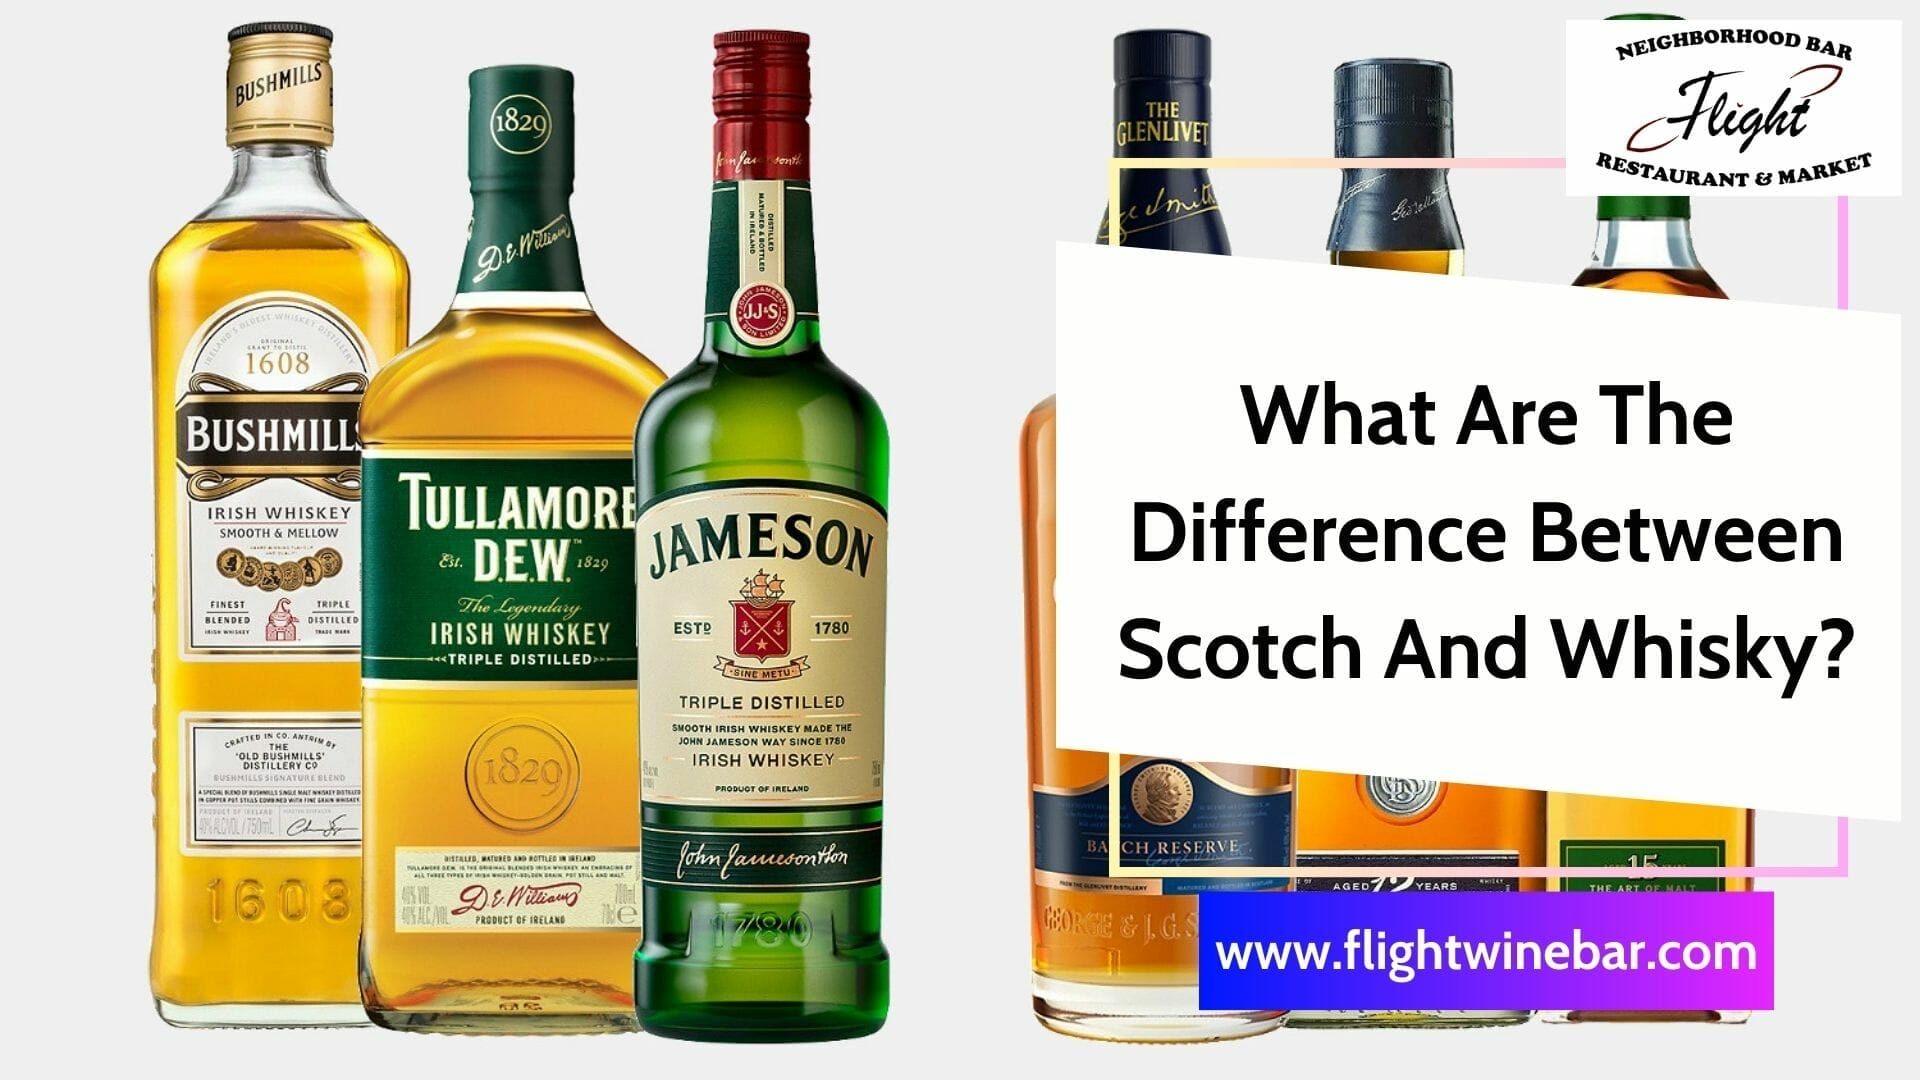 What Are The Difference Between Scotch And Whisky